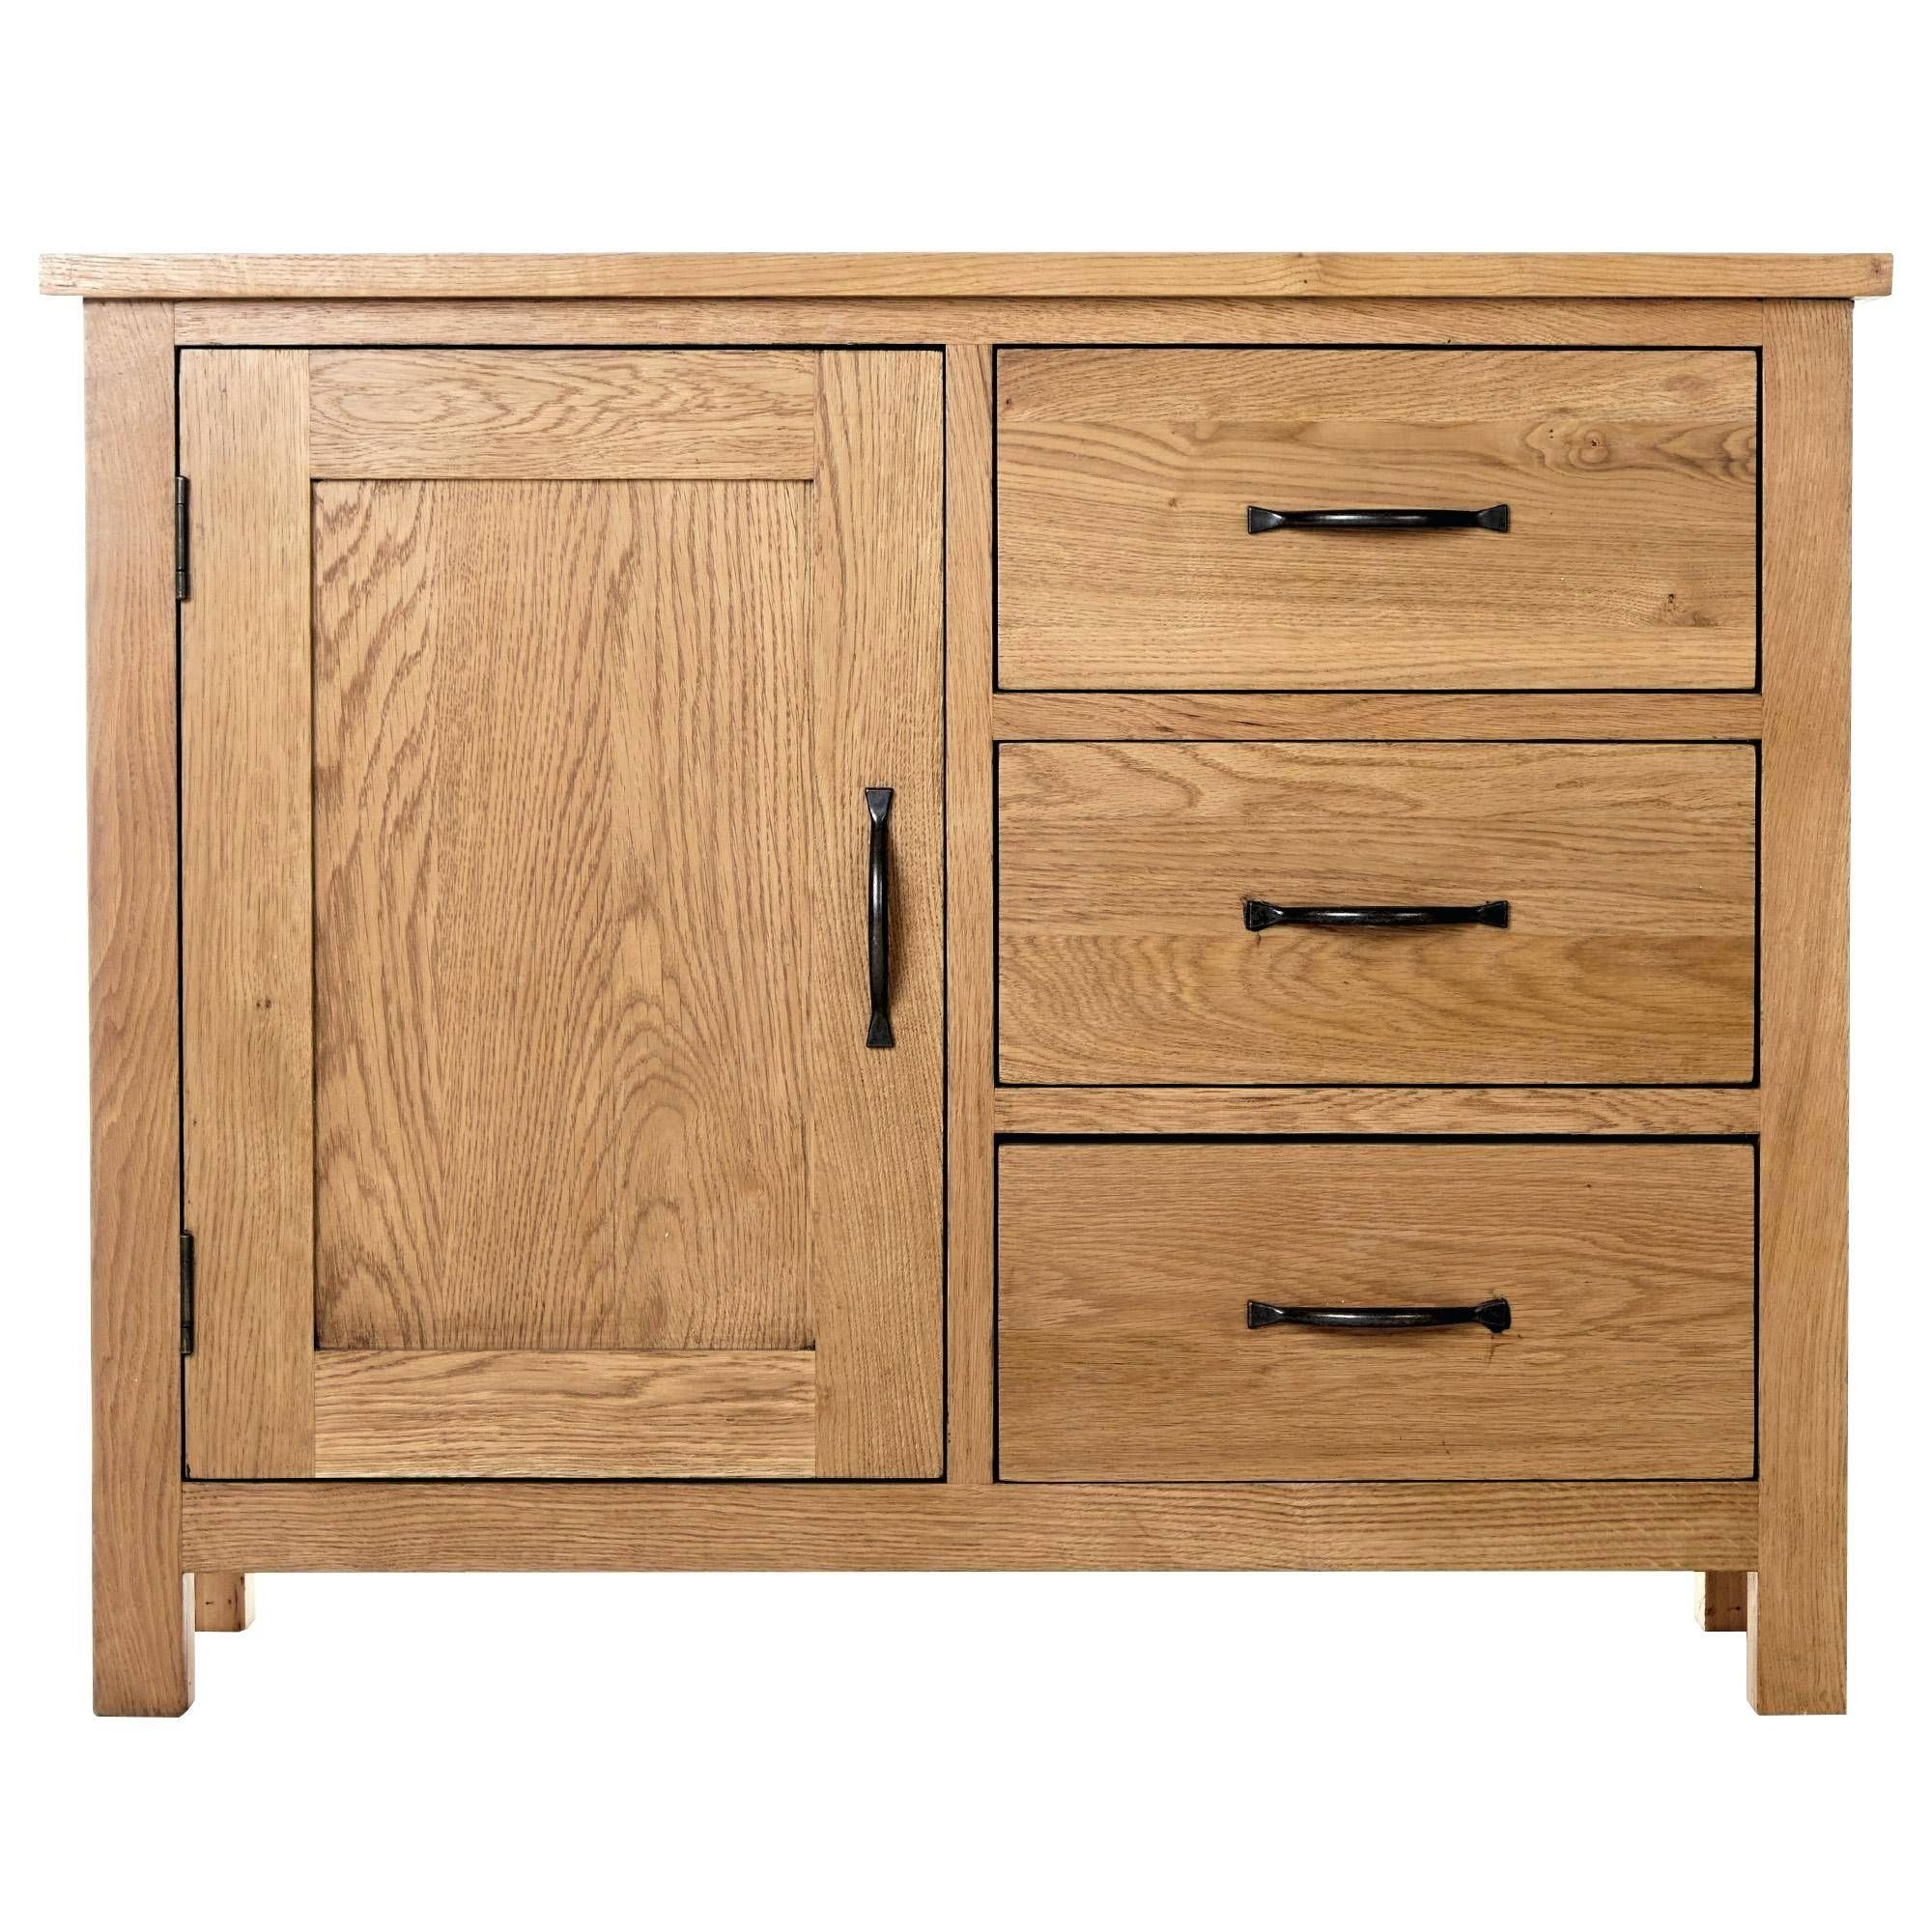 Wooden Sideboards Oak Sideboards Uk Only – Roborob.co Intended For 2018 Wooden Sideboards (Photo 3 of 15)